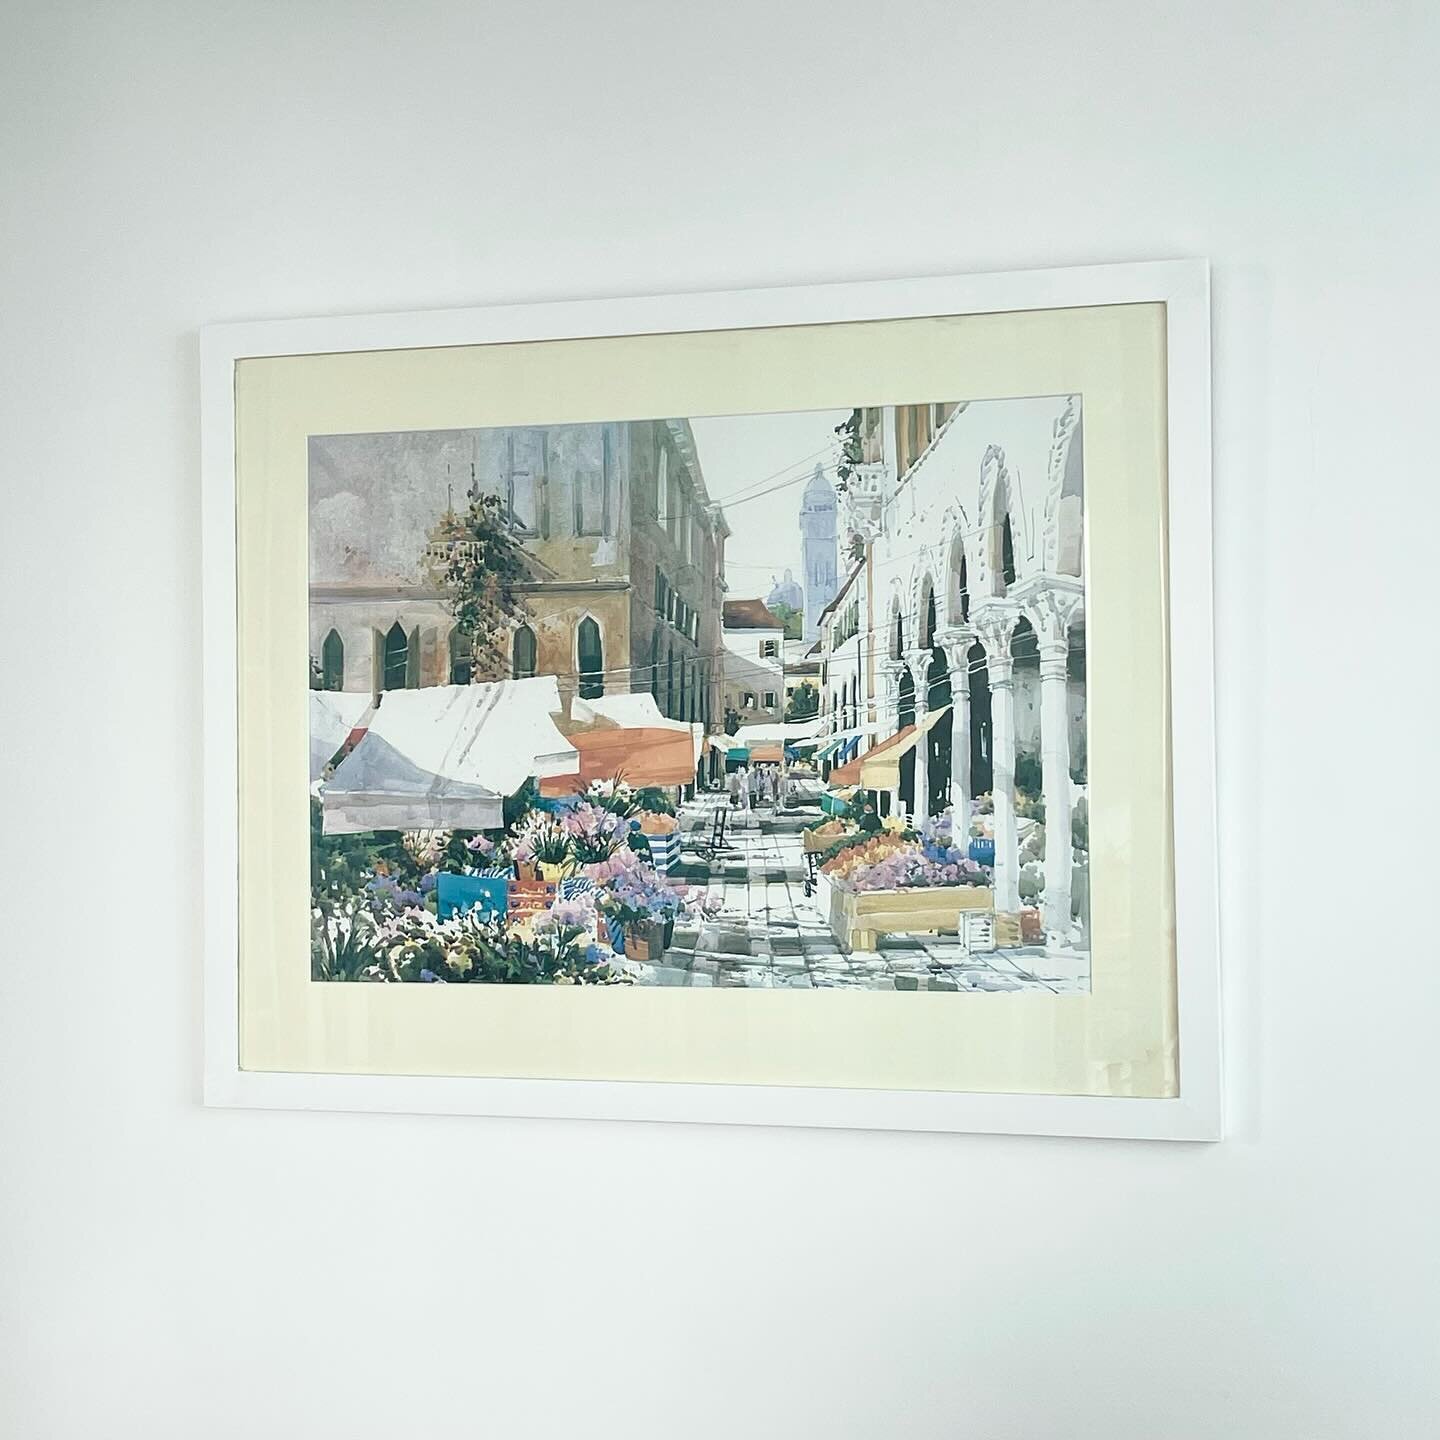 SOLD 🍋 european flower market watercolour print 💐

&bull; by artist marilyn simandle
&bull; this frame has recently been painted white however it&rsquo;s definitely not perfect. it could easily be sanded back to its former glory, it appears to a ti